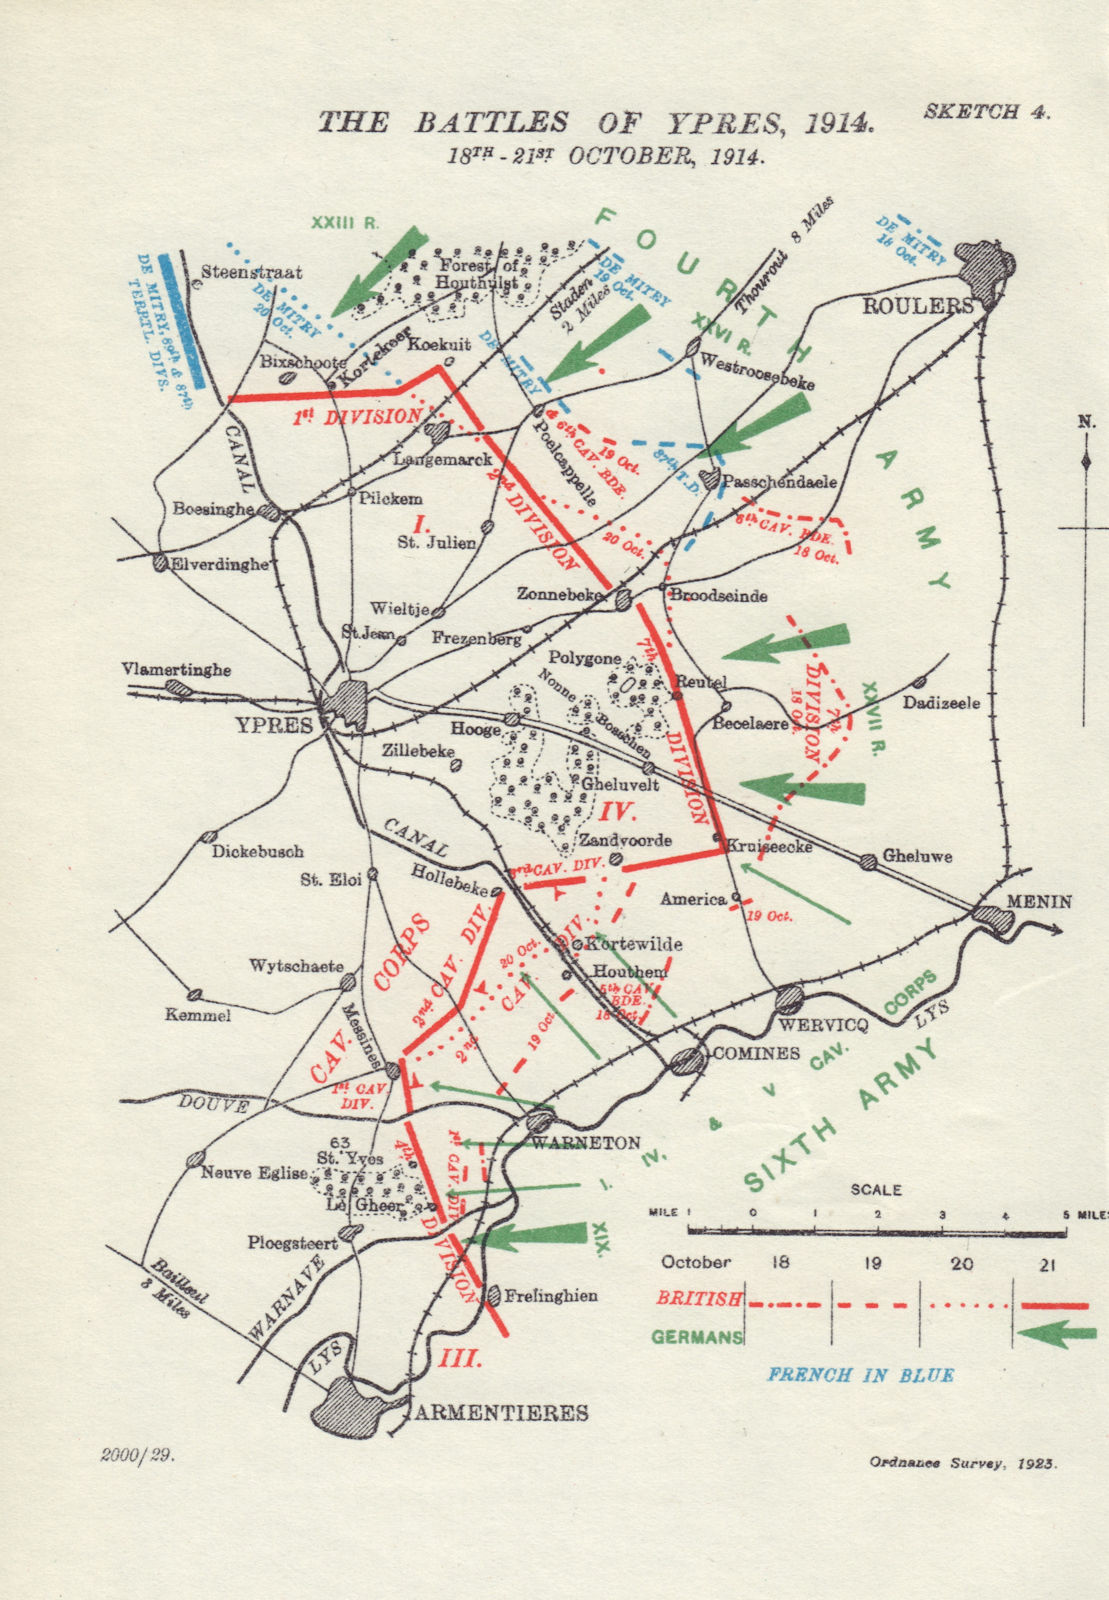 Associate Product Battle of Ypres. 18th-21st October, 1914. First World War. 1925 old map